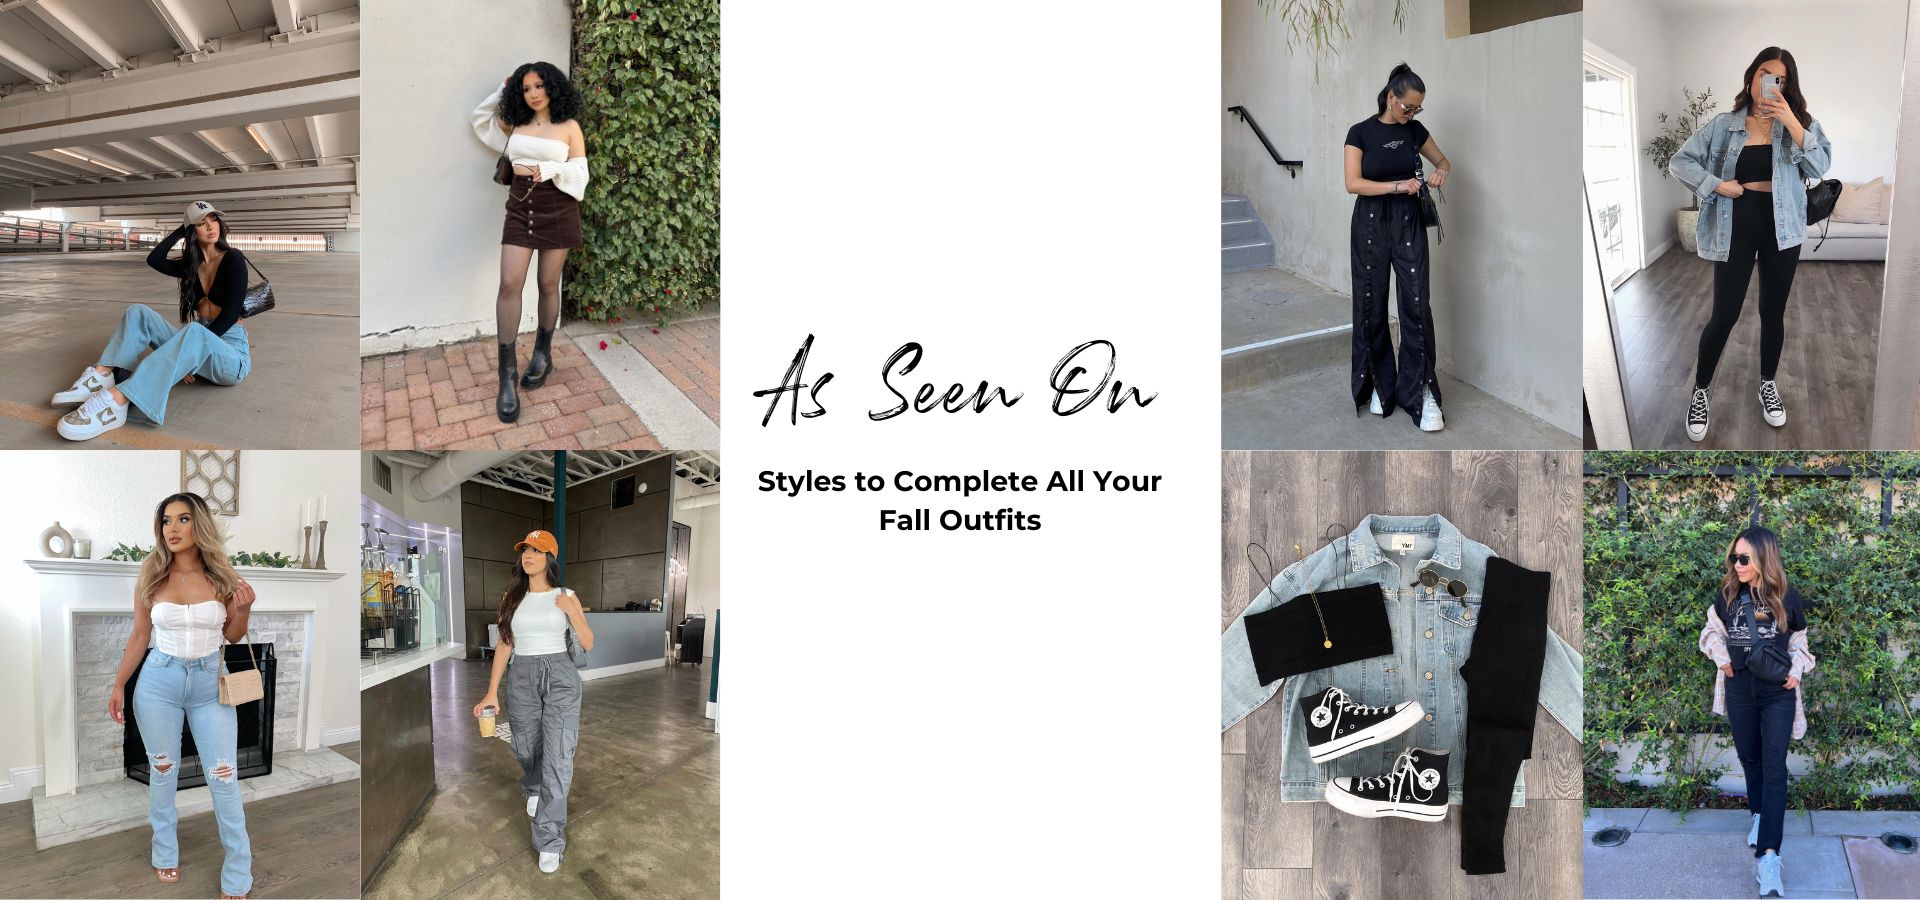 As Seen On - Styles To Complete All Your Fall Outfits – YMI JEANS